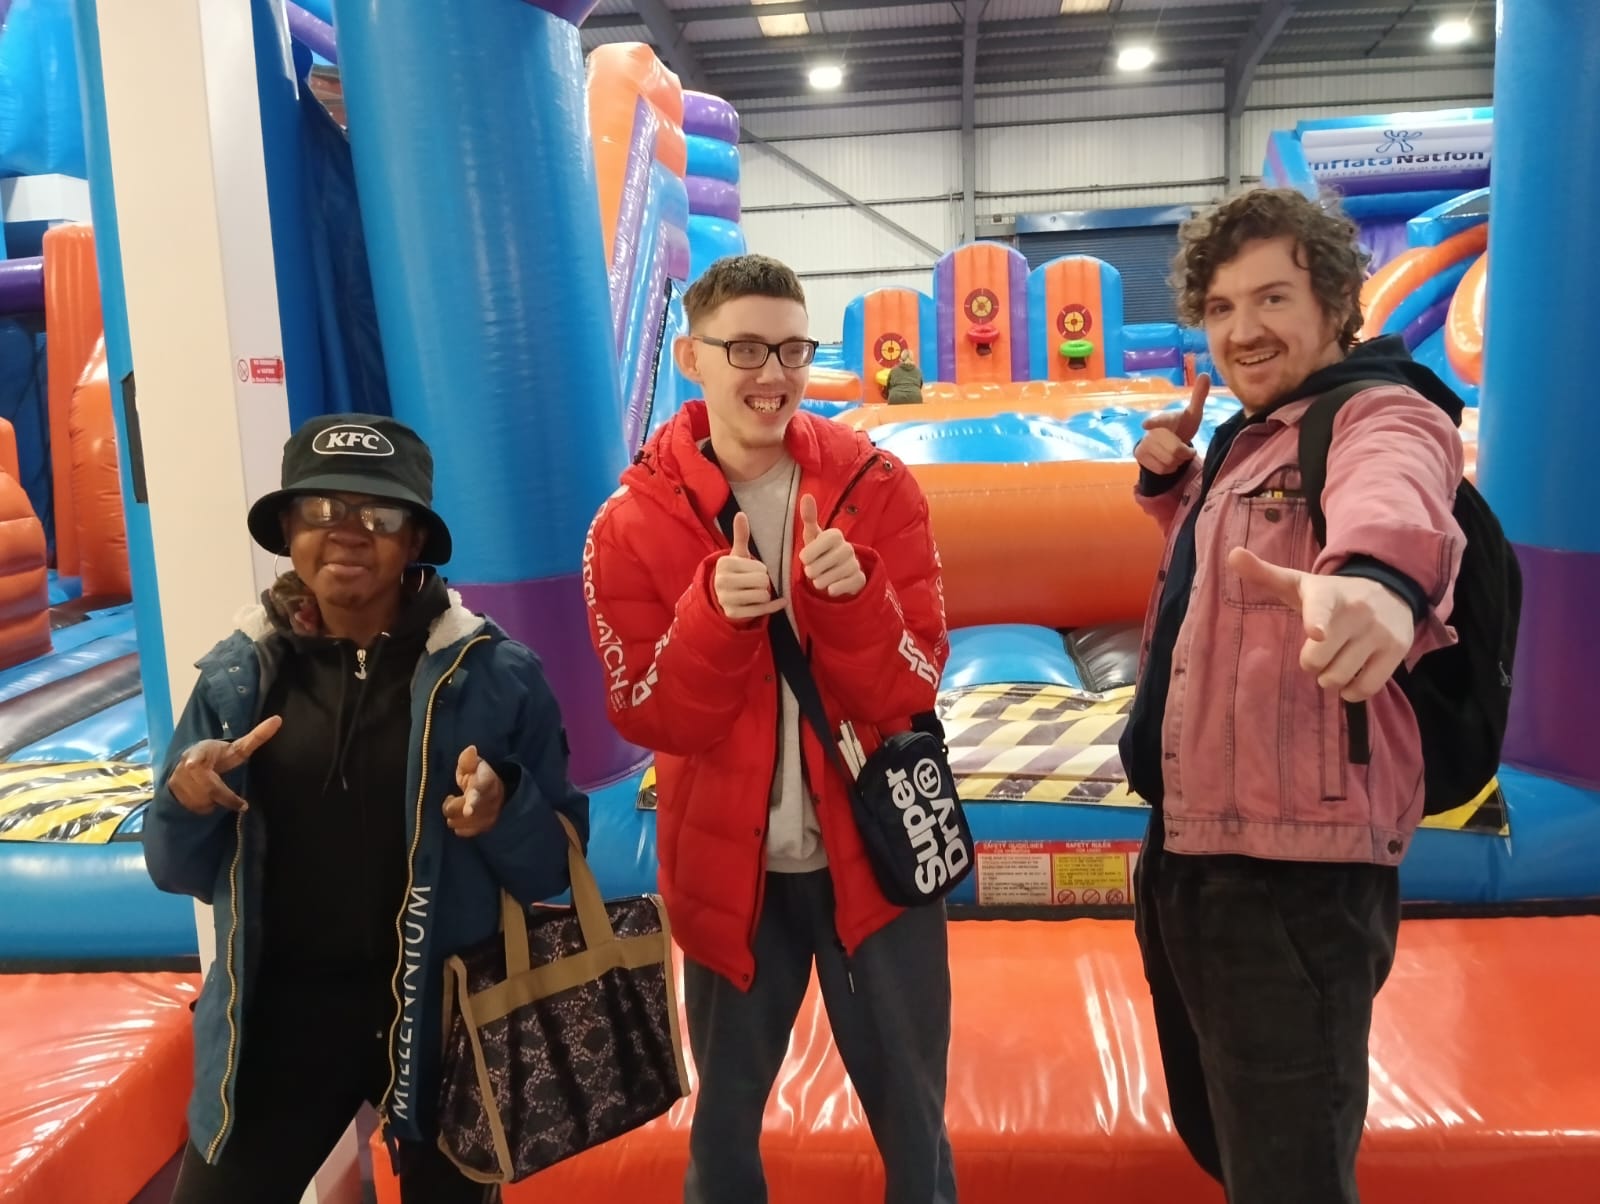 Young people and staff at an indoor inflatable park